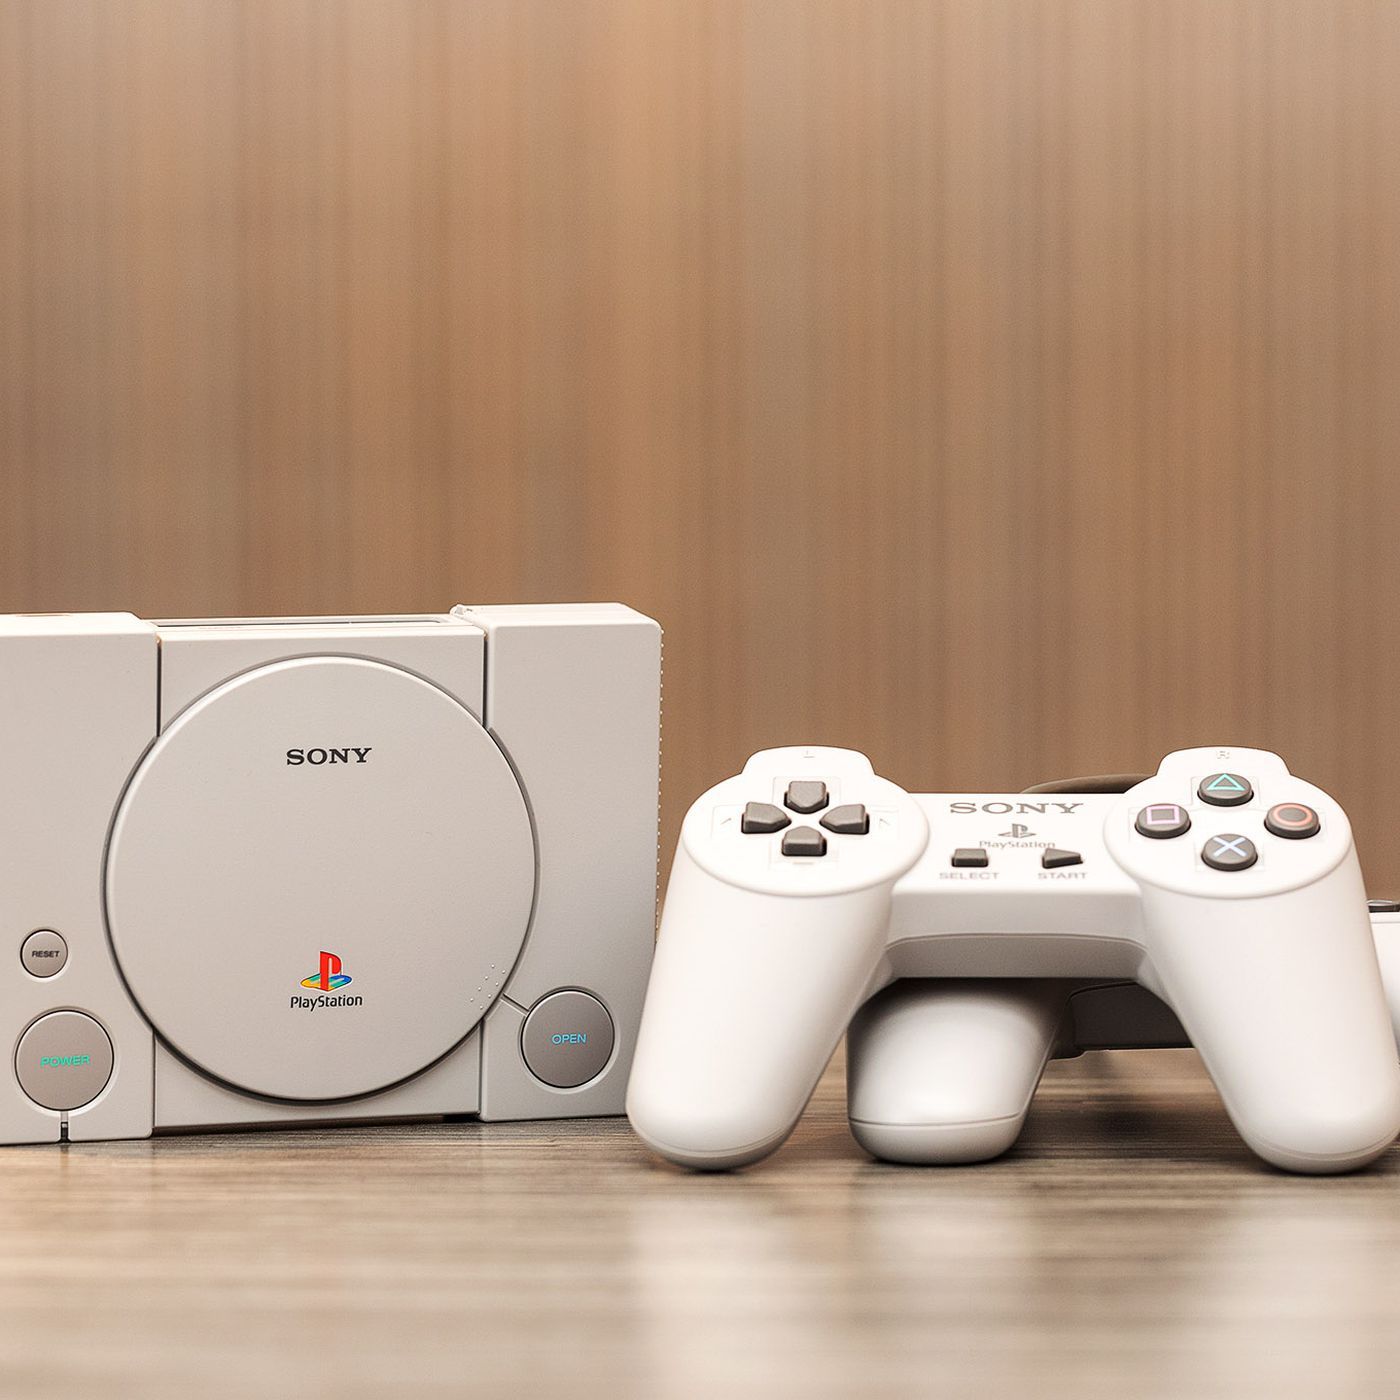 PlayStation Classic has a secret debug menu that can be reached